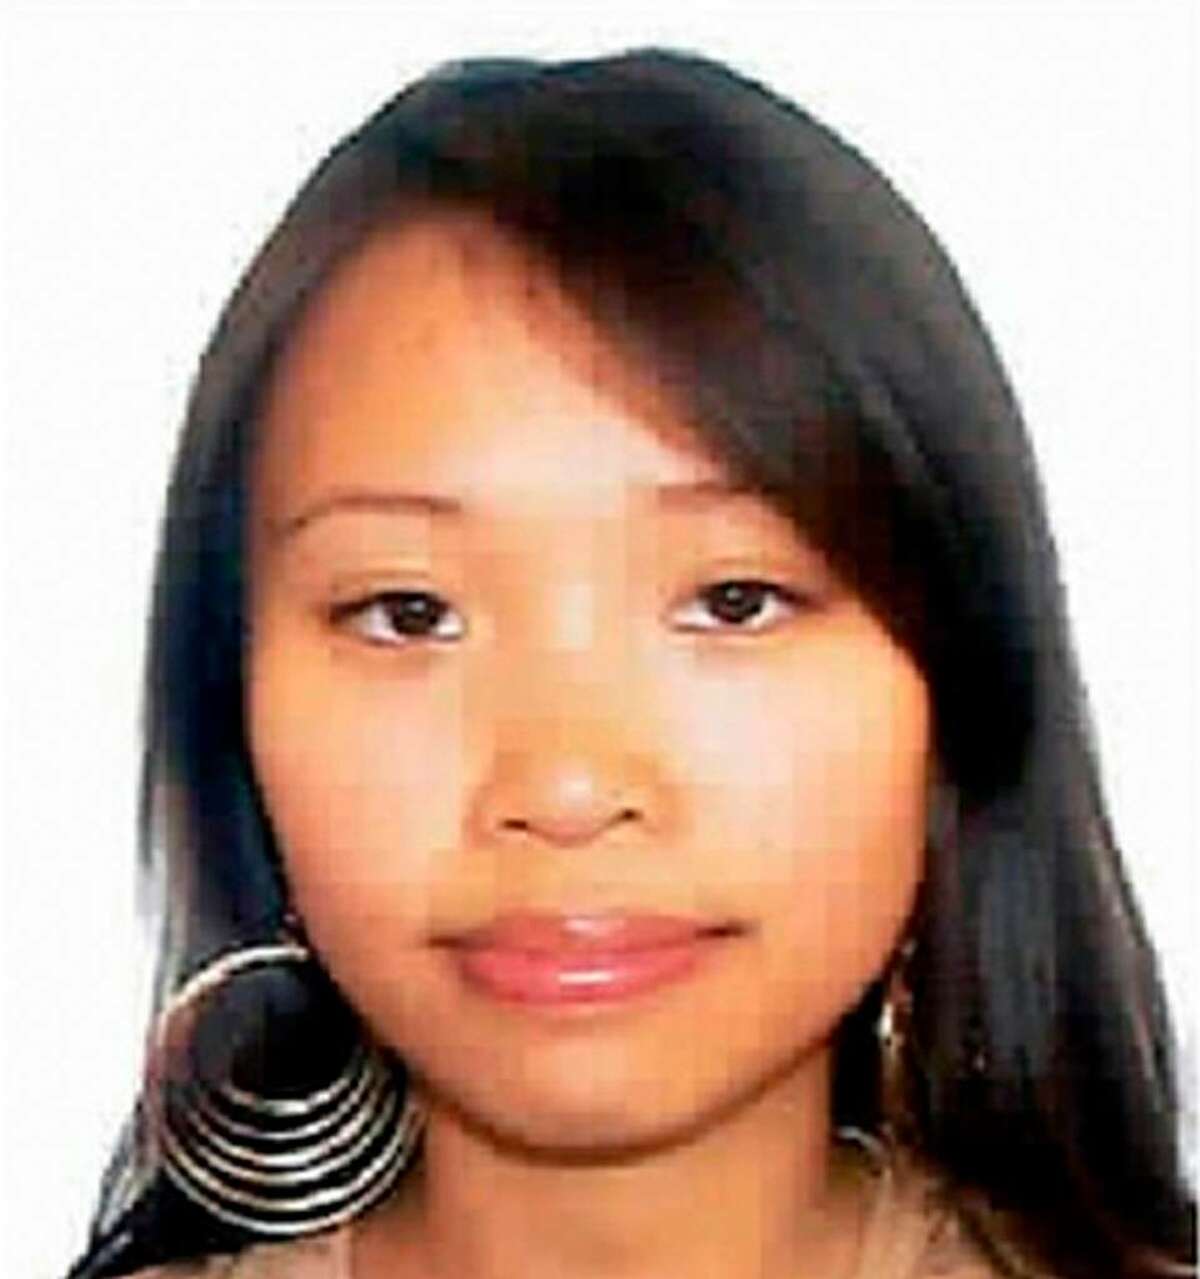 This composite photo release by New Haven Police Dept., shows Yale graduate student Annie Le in a video image entering 10 Amistad the morning of her disappearance on the campus at Yale University in new haven, Conn. Sept. 8, 2009. At left is an undated of Le. Police on Sunday said they found what they believe is the body of the graduate student and bride-to-be hidden inside the wall of 10 Amistad, a university building where she was last seen. (AP Photo/New Haven Police Dept.)